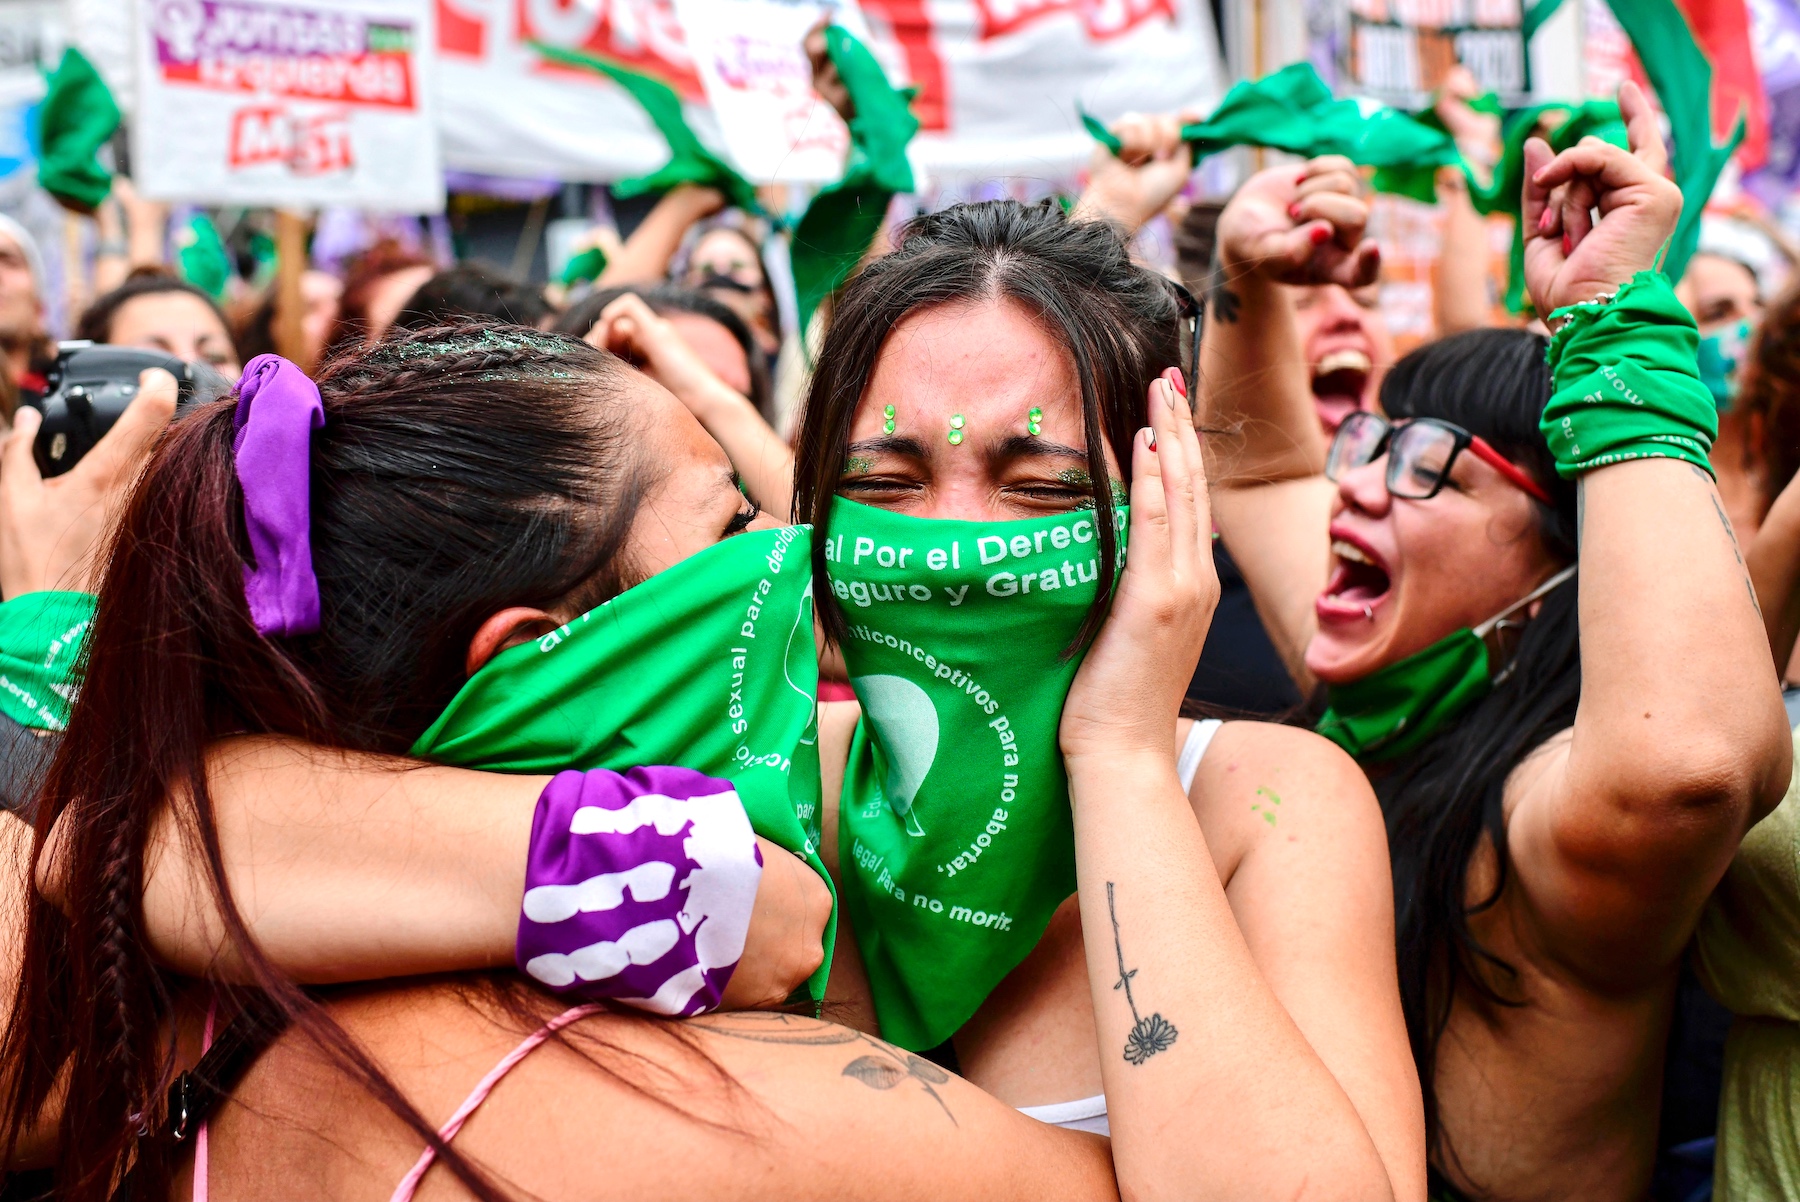 Argentina Will Now Allow Women To Get The Morning-After Pill Without A Doctor’s Prescription